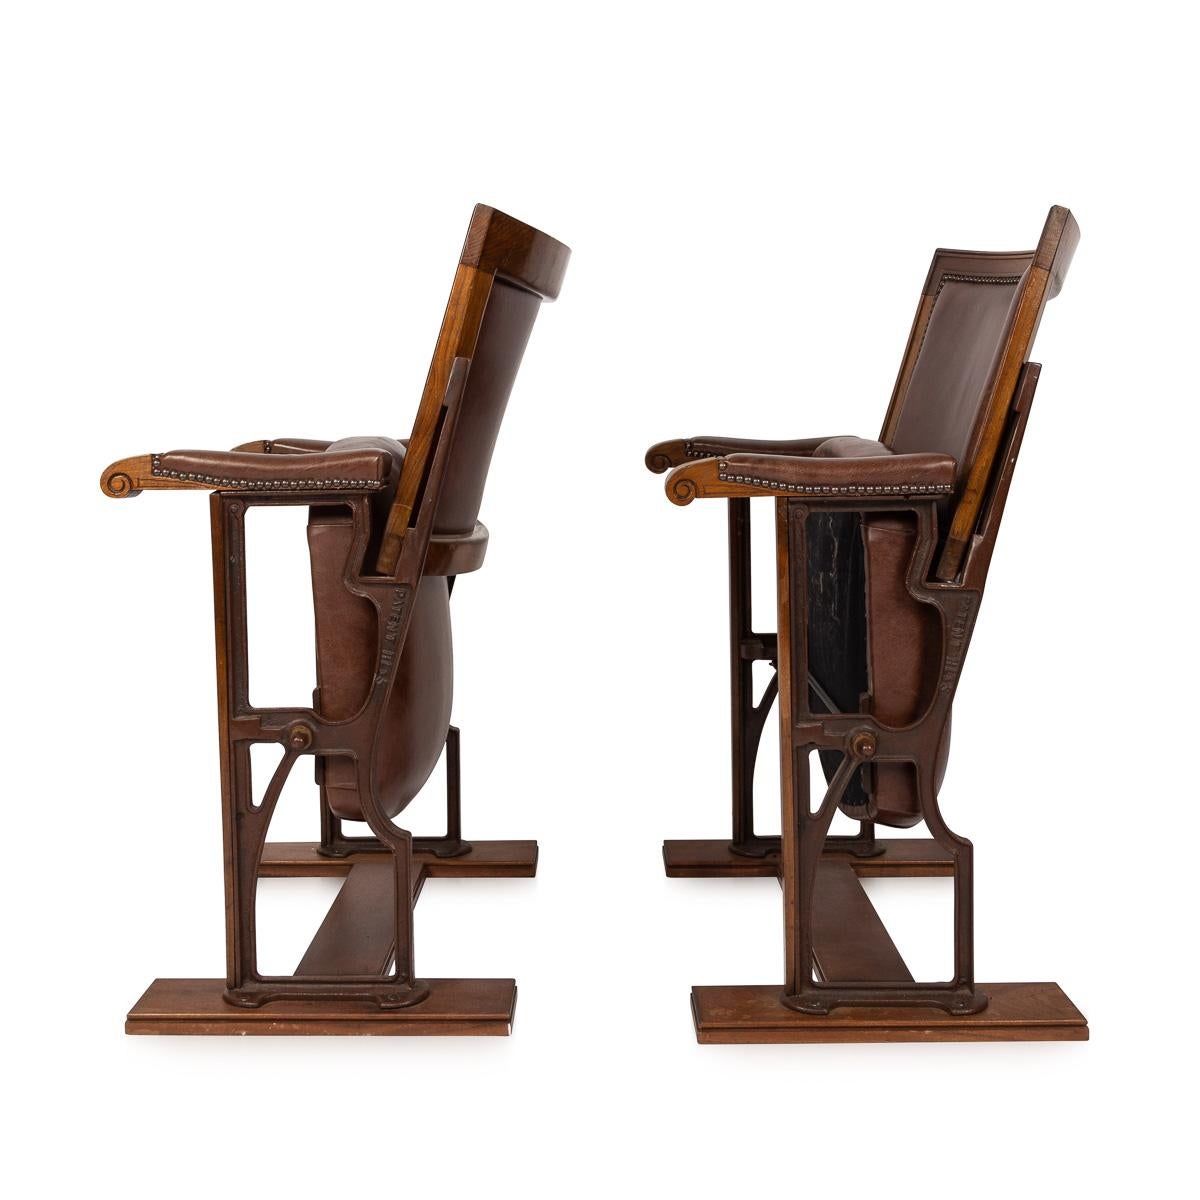 English 20th Century Edwardian Mahogany and Leather Cinema / Theatre Chairs, circa 1900 For Sale